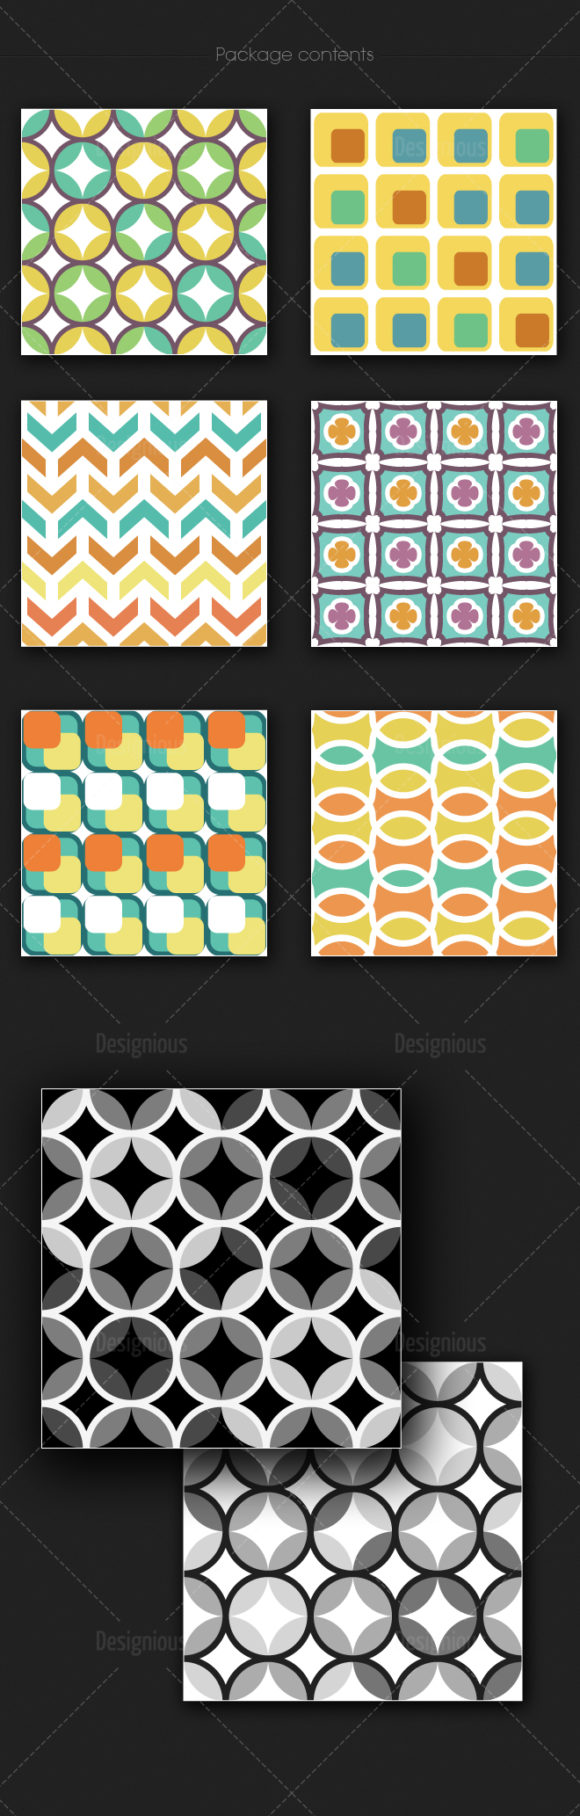 Seamless Patterns Vector Pack 178 2